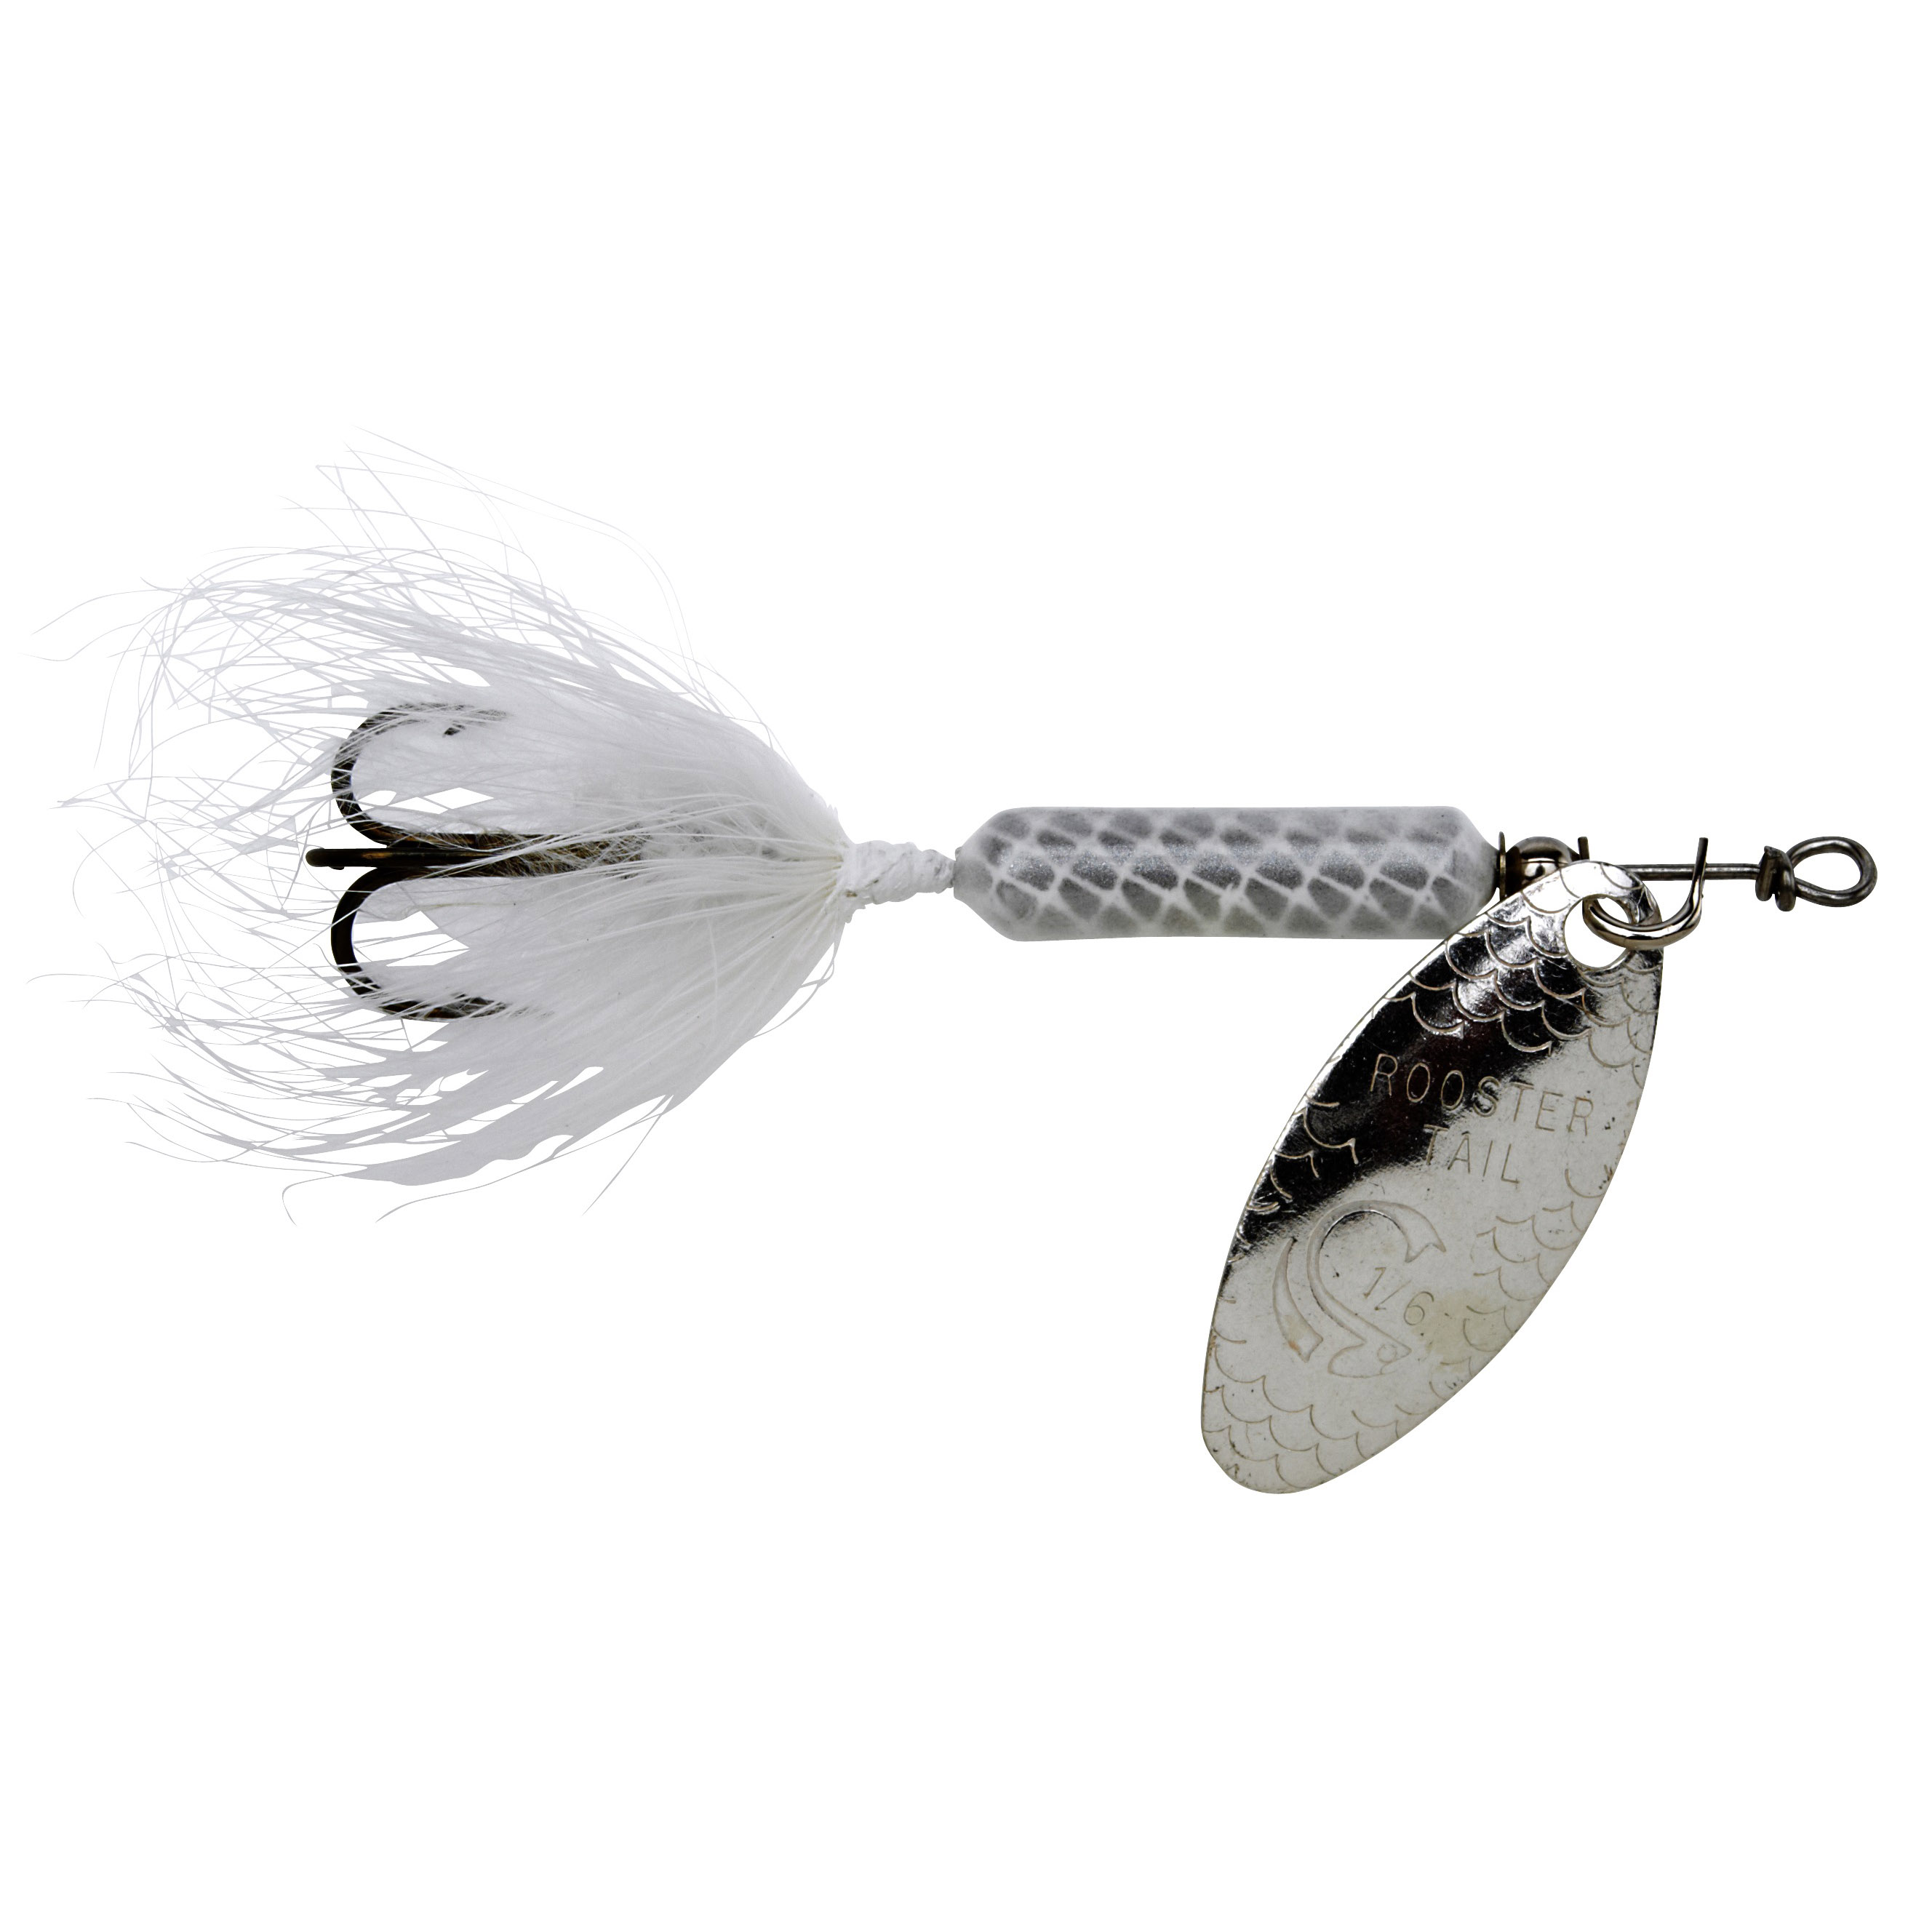 ROOSTER TAIL 208-WH Spinner Lure, White Lure - 1